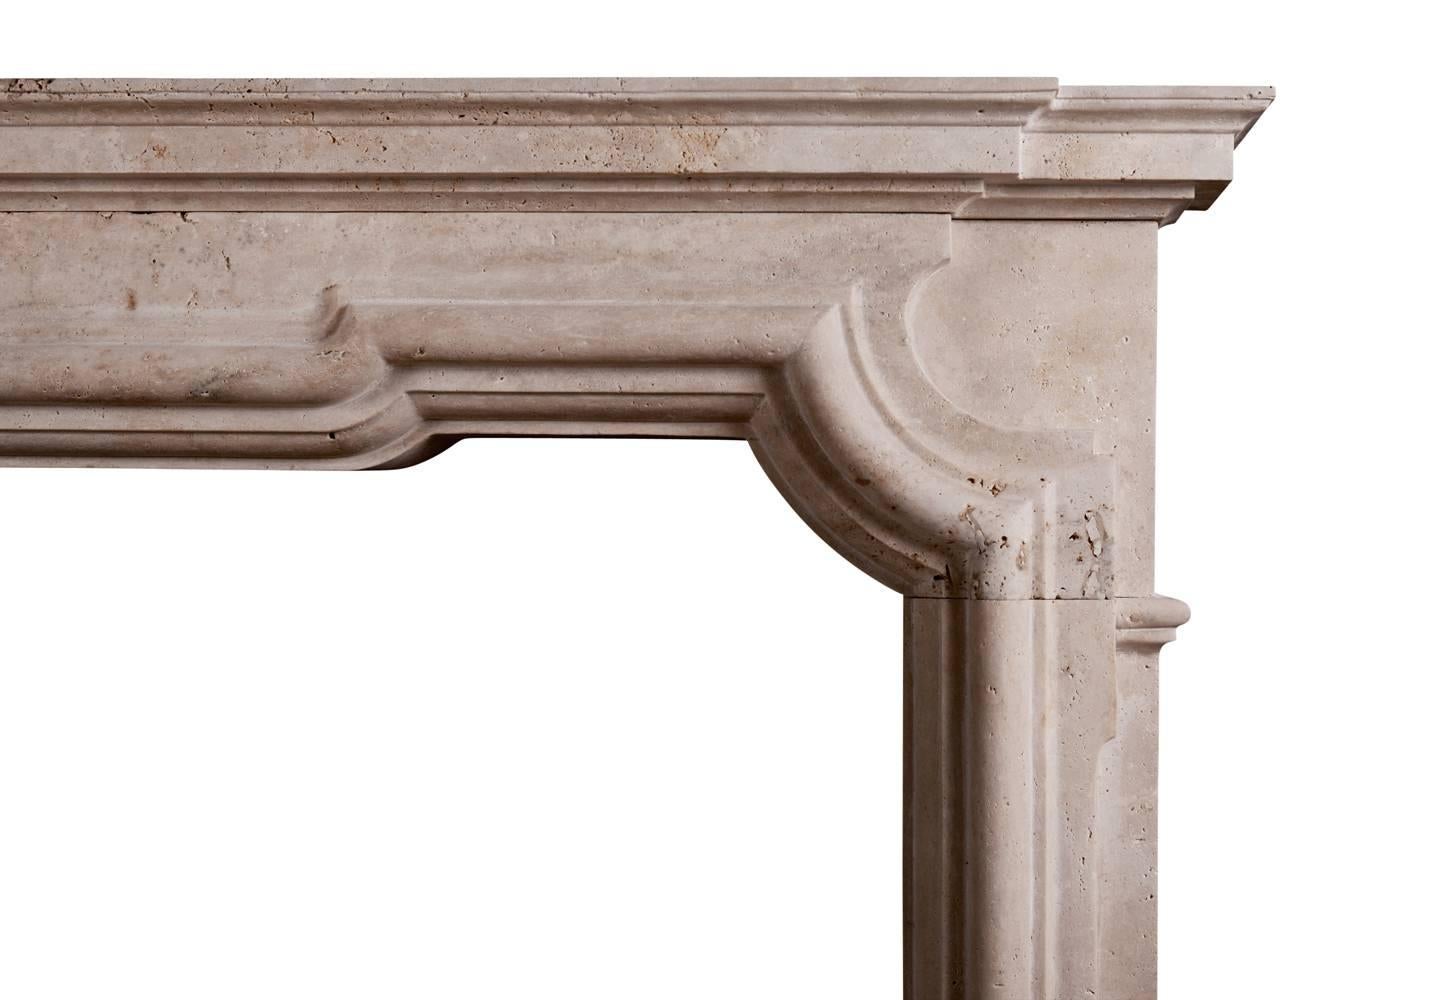 A good quality Italian fireplace in the Baroque manner in white travertine stone. The shaped frieze with heavy moulding and breakfront shelf above. A substantial piece. Modern.
N.B. May be subject to an extended lead time, please enquire for more